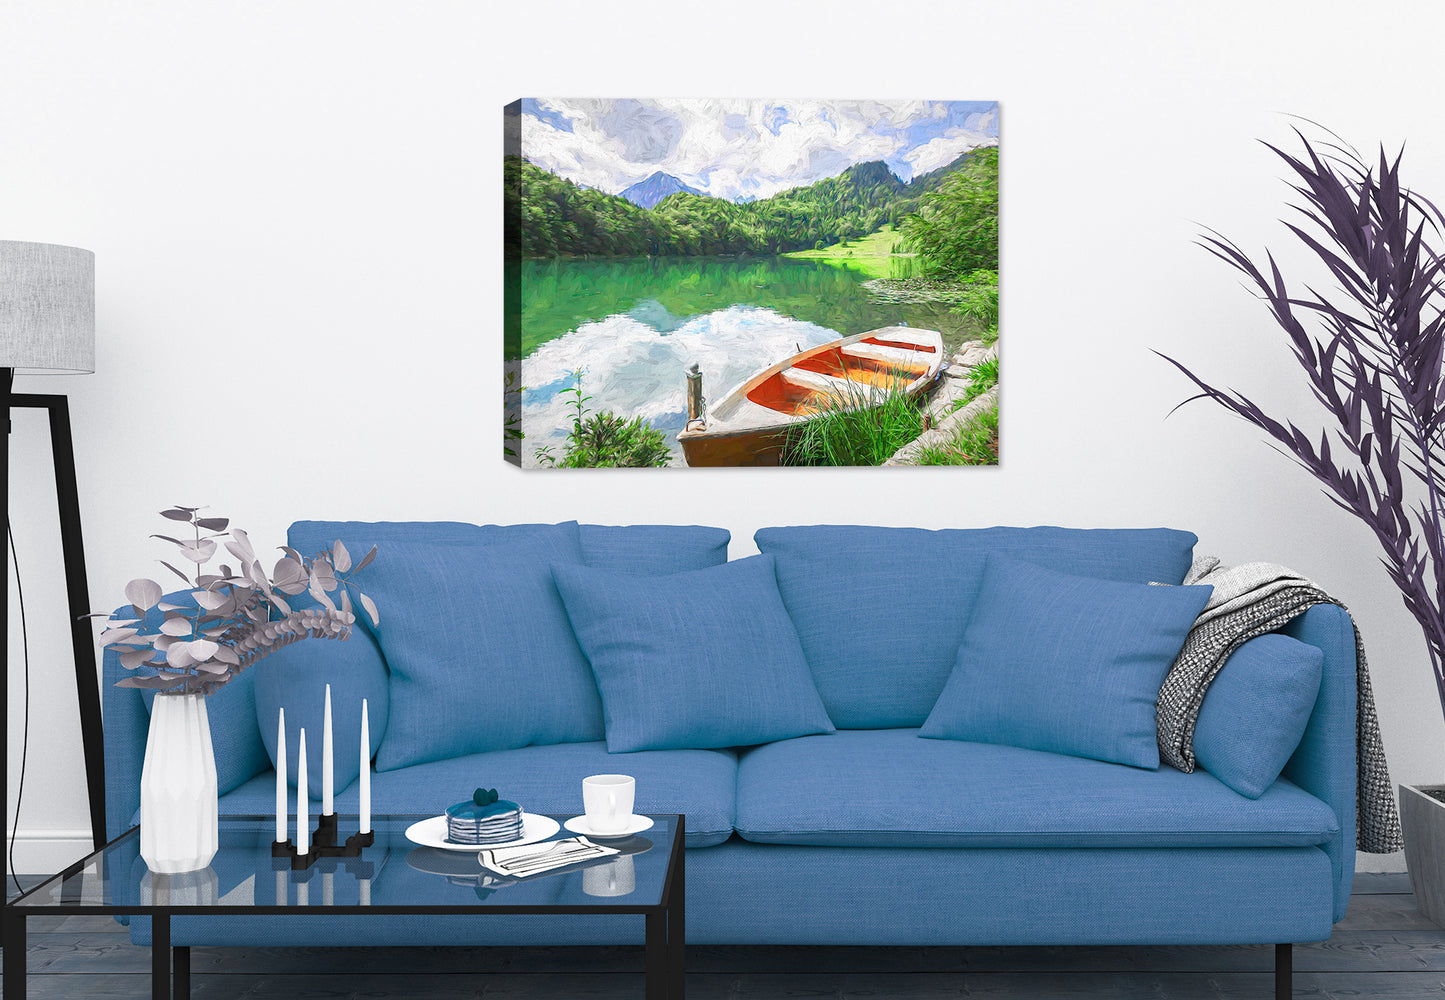 Peaceful Day on the Lake - Fine Art Painting